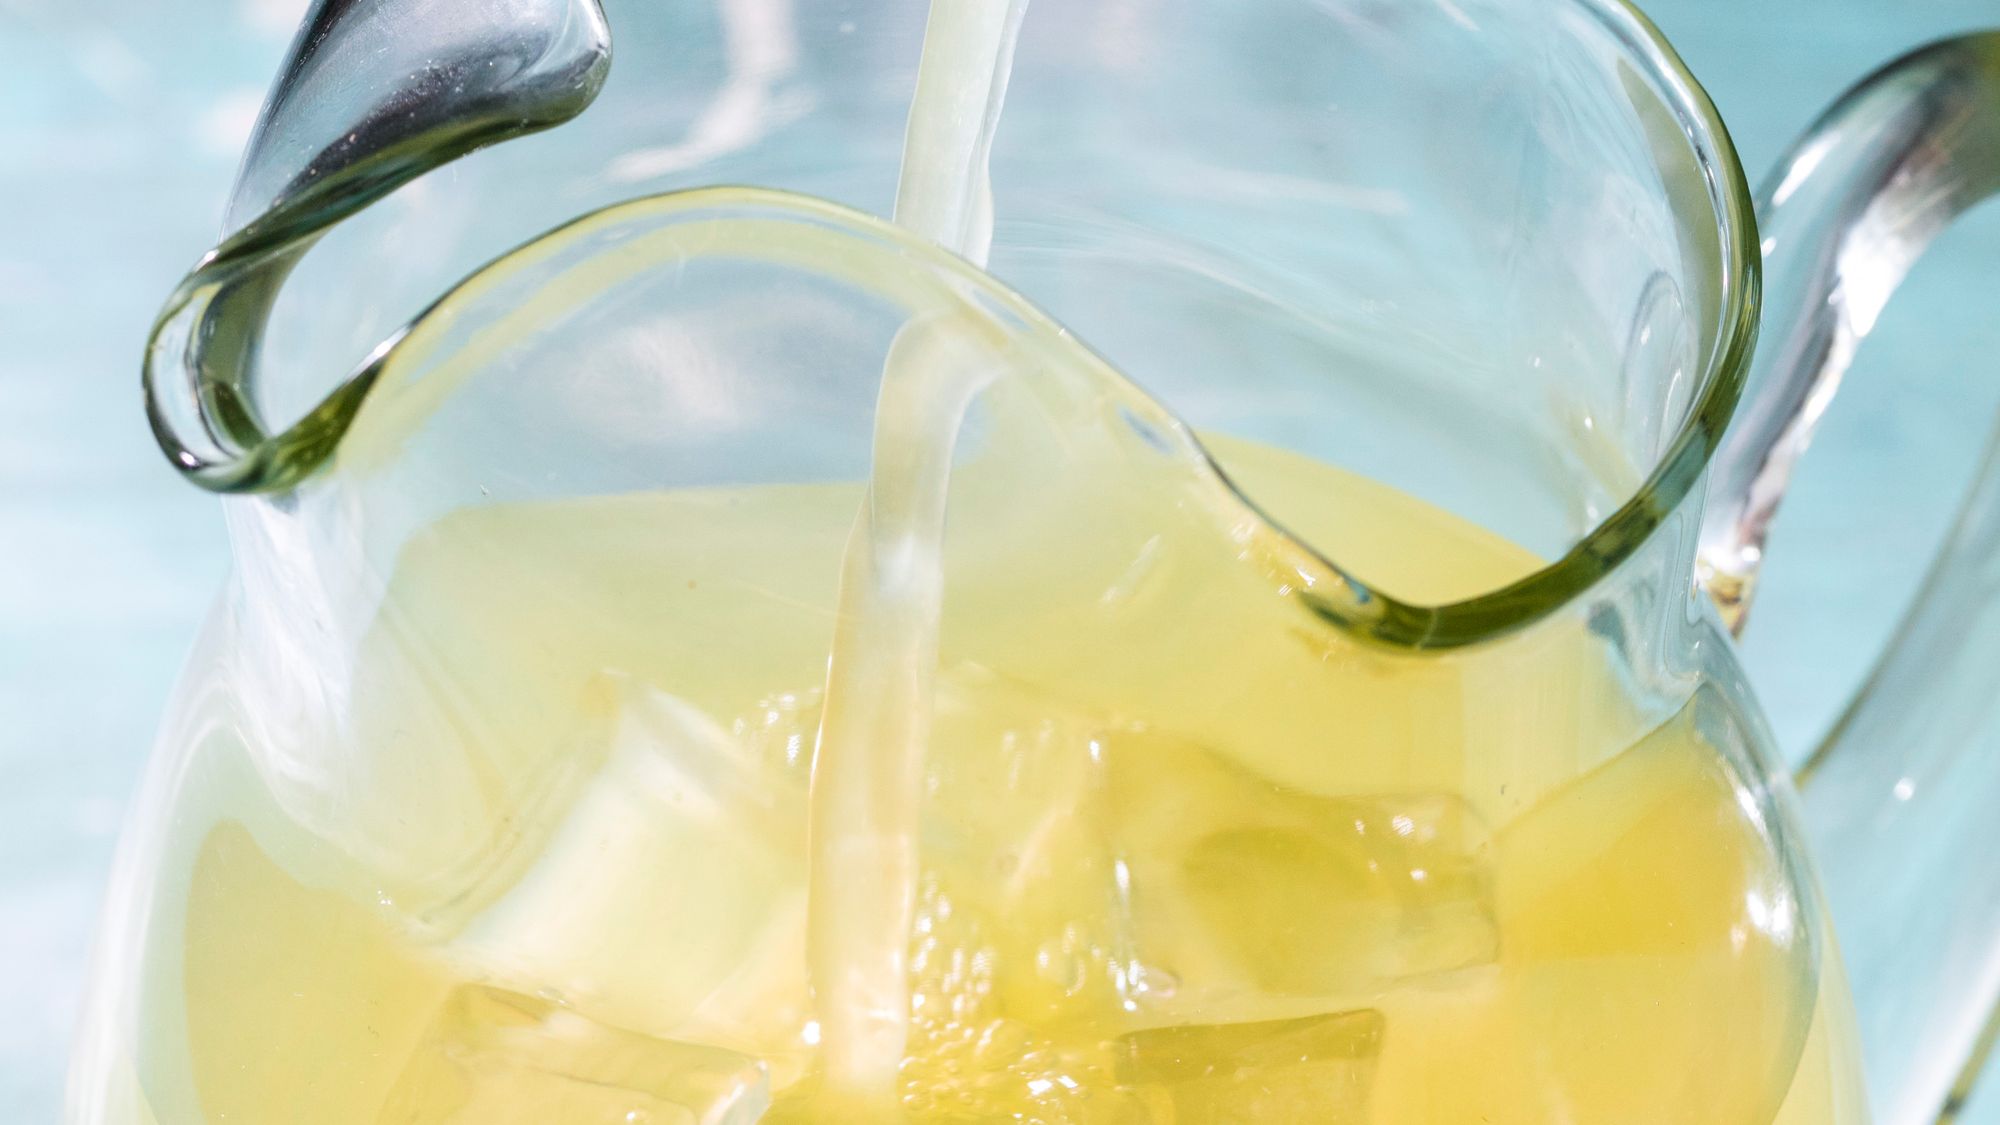 This is the best lemonade you’ll have this summer